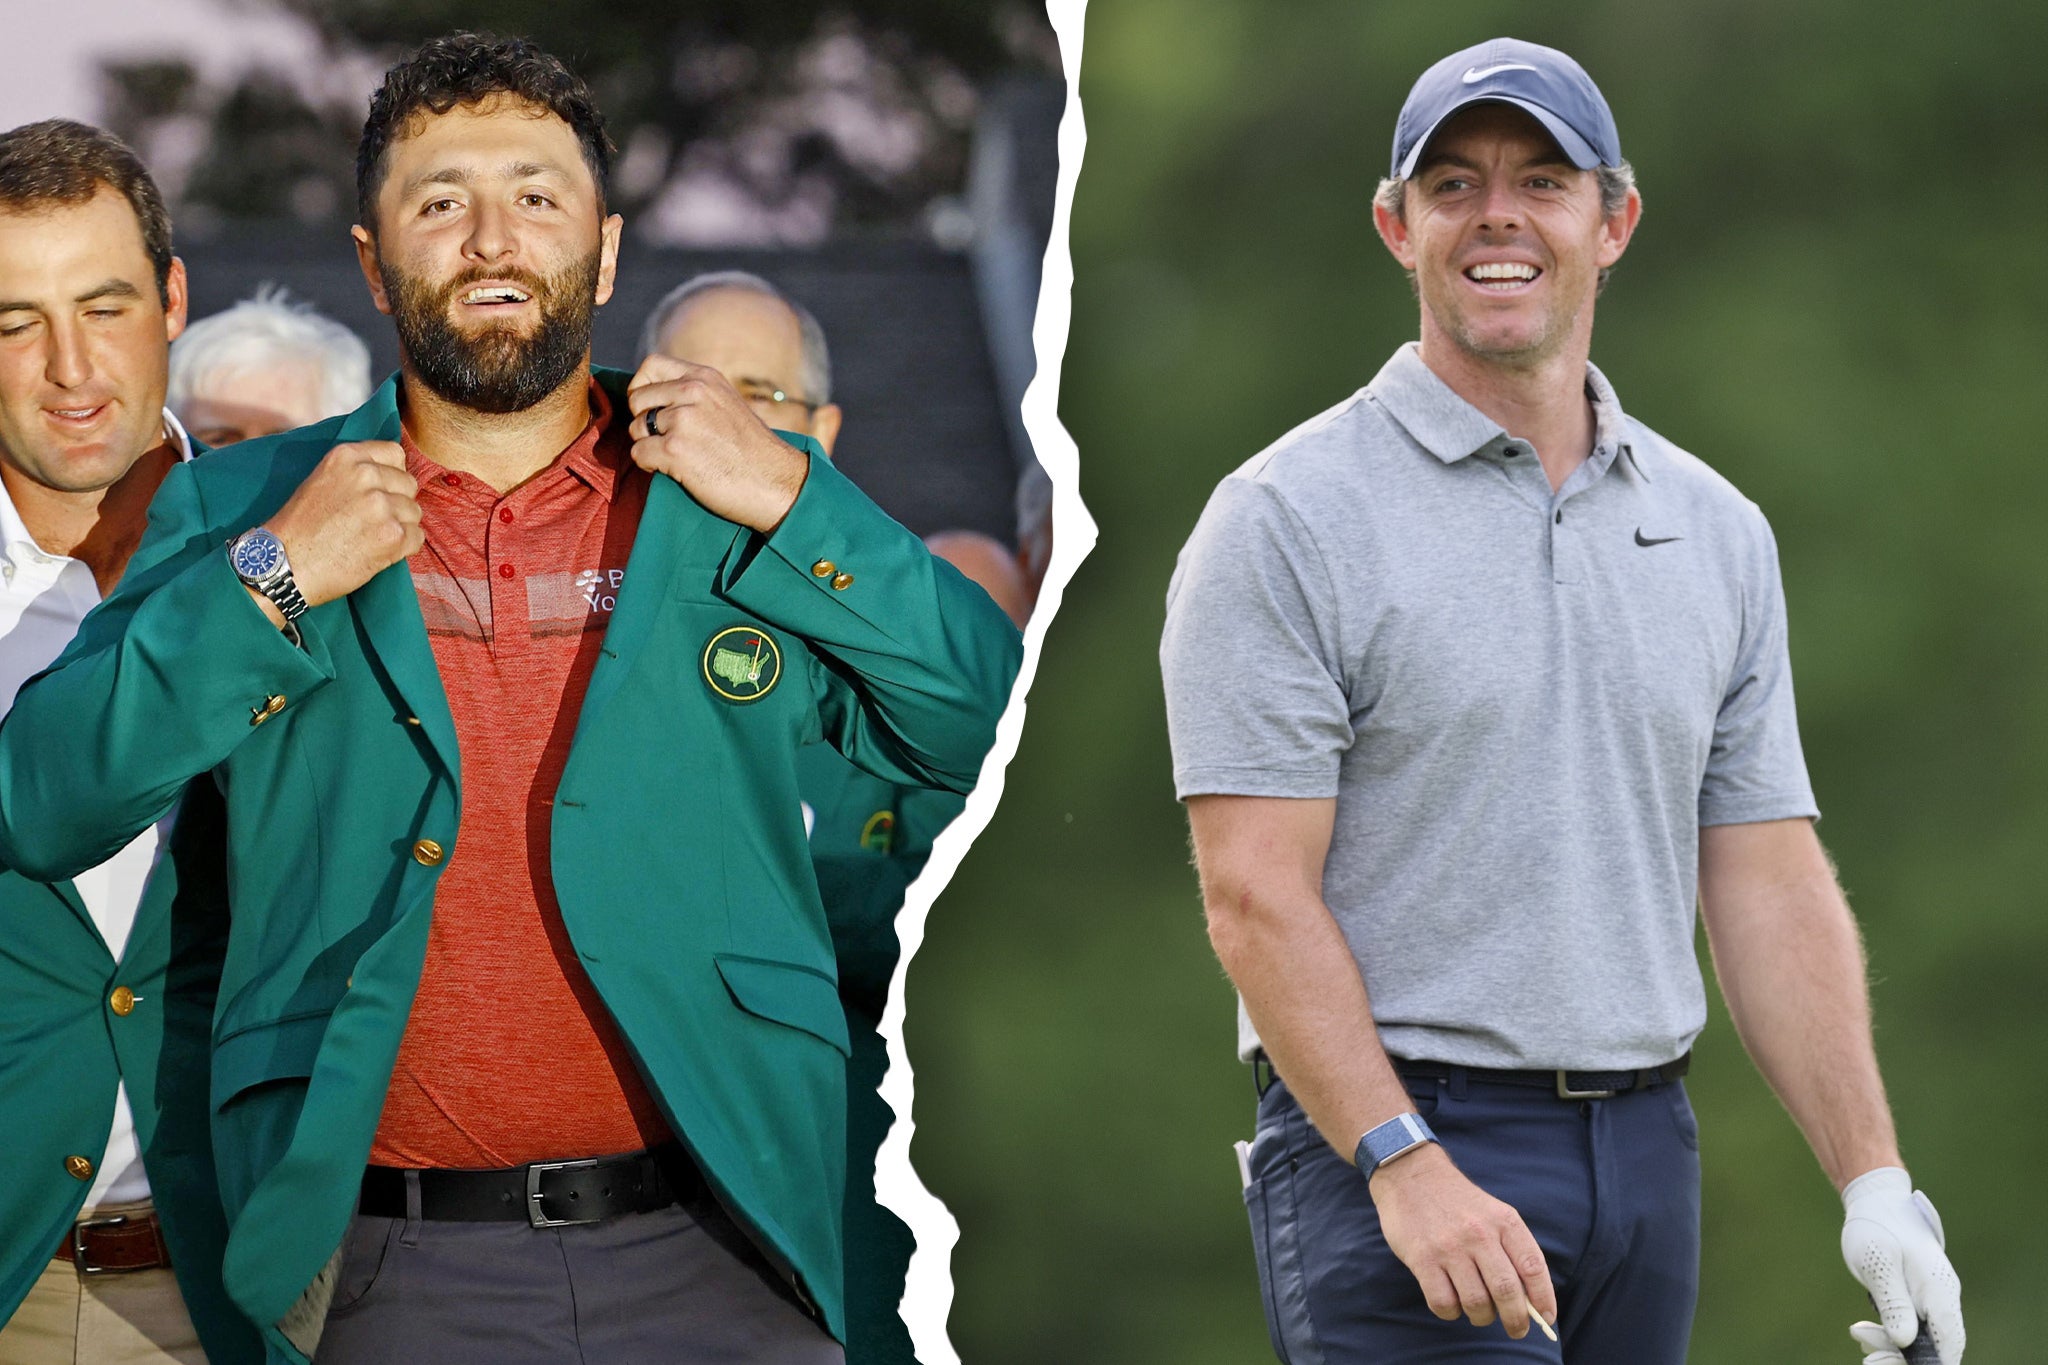 Jon Rahm, left, has announced he is joining the LIV Tour on a contract reckoned to be worth $450m (£358m), while Rory McIlroy, right, remains with the PGA Tour